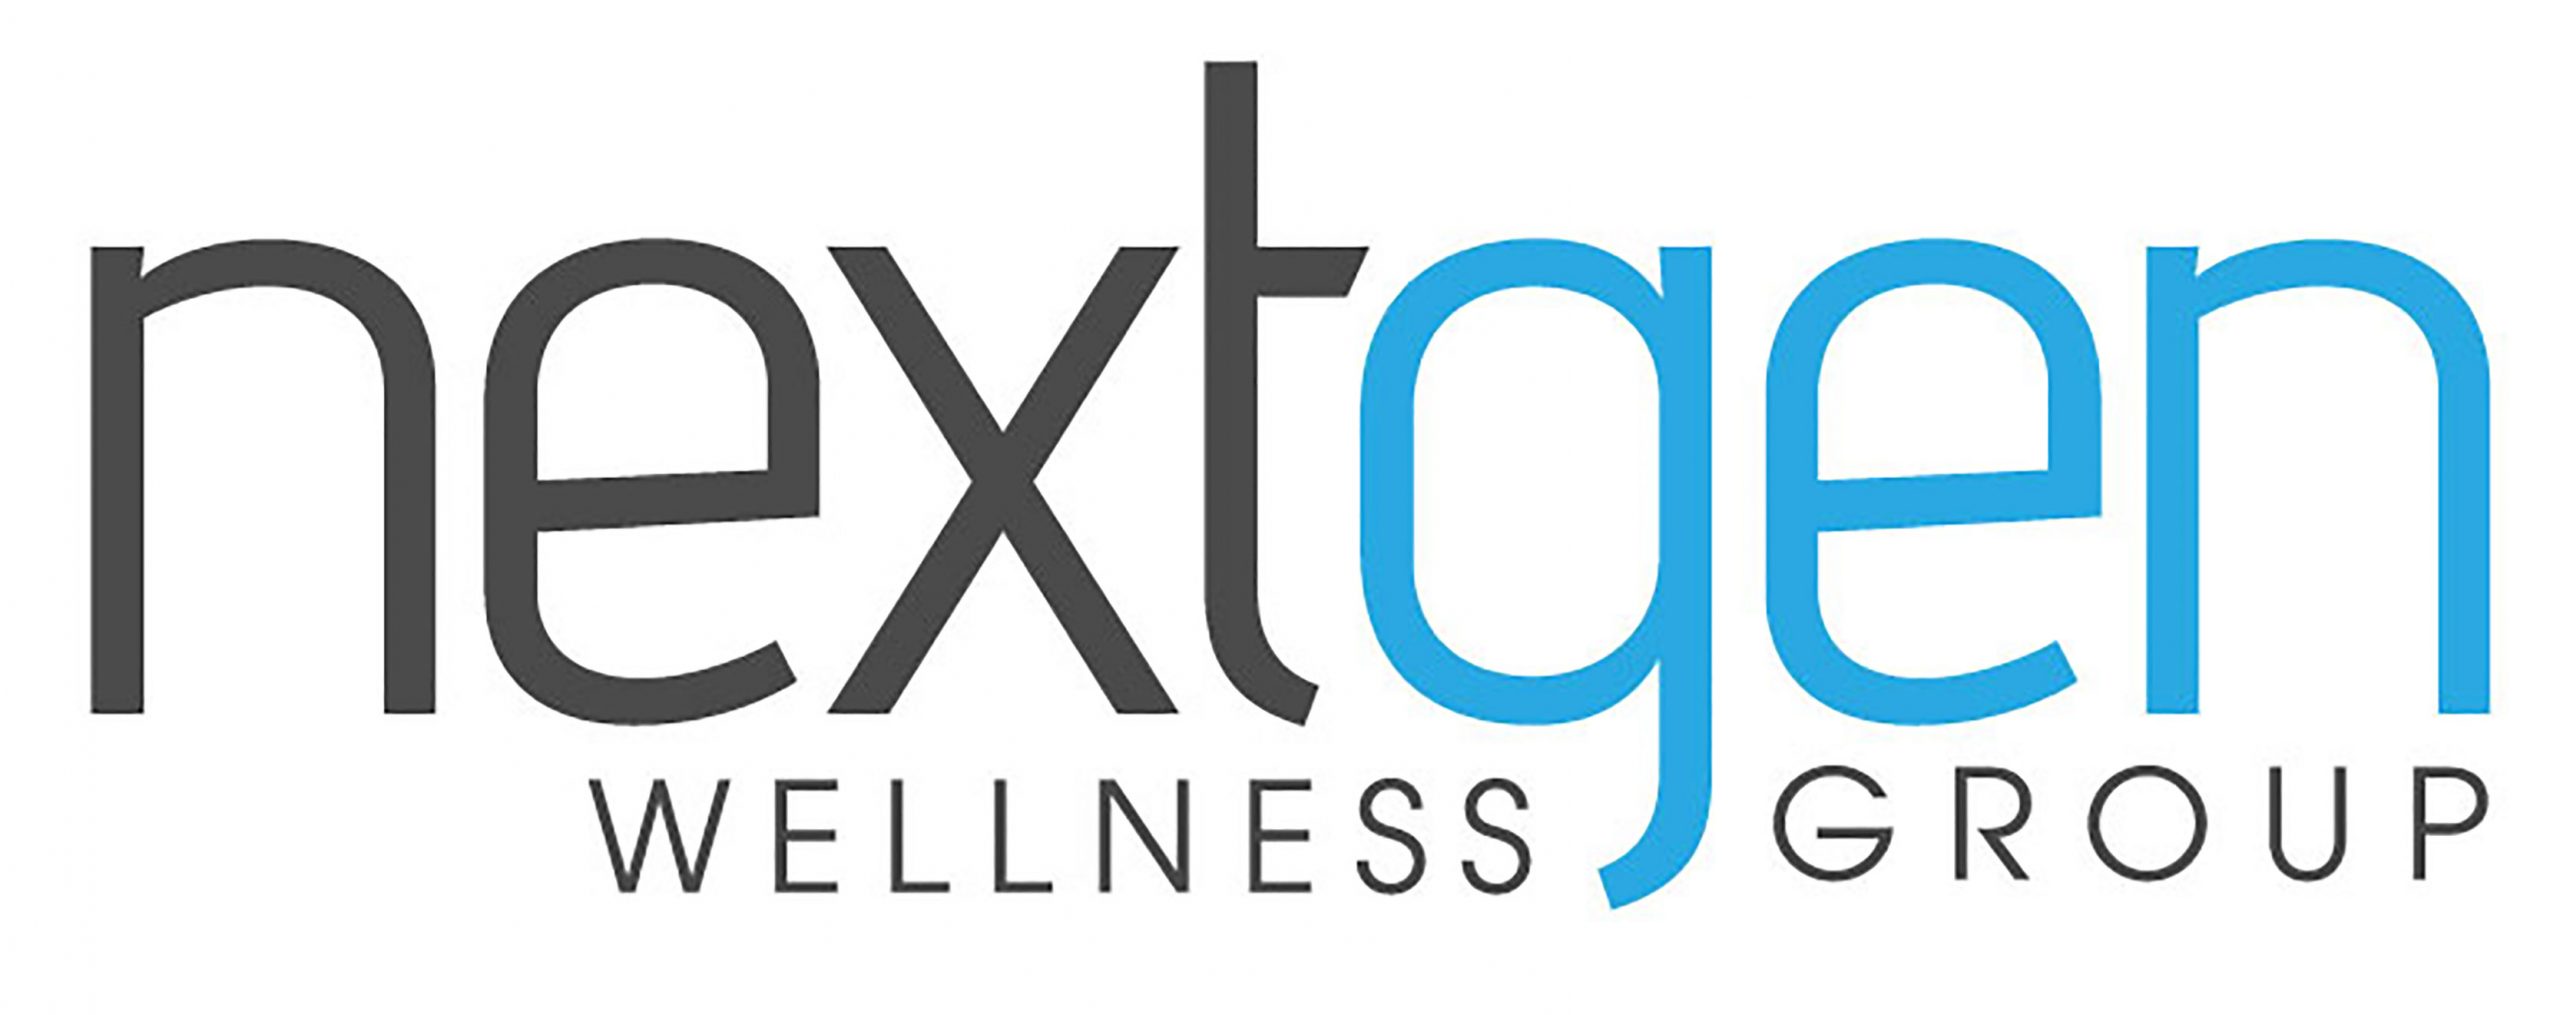 nextgen wellness group workers comp injury clinic y automobile accident injury clinic Addison y Arlington